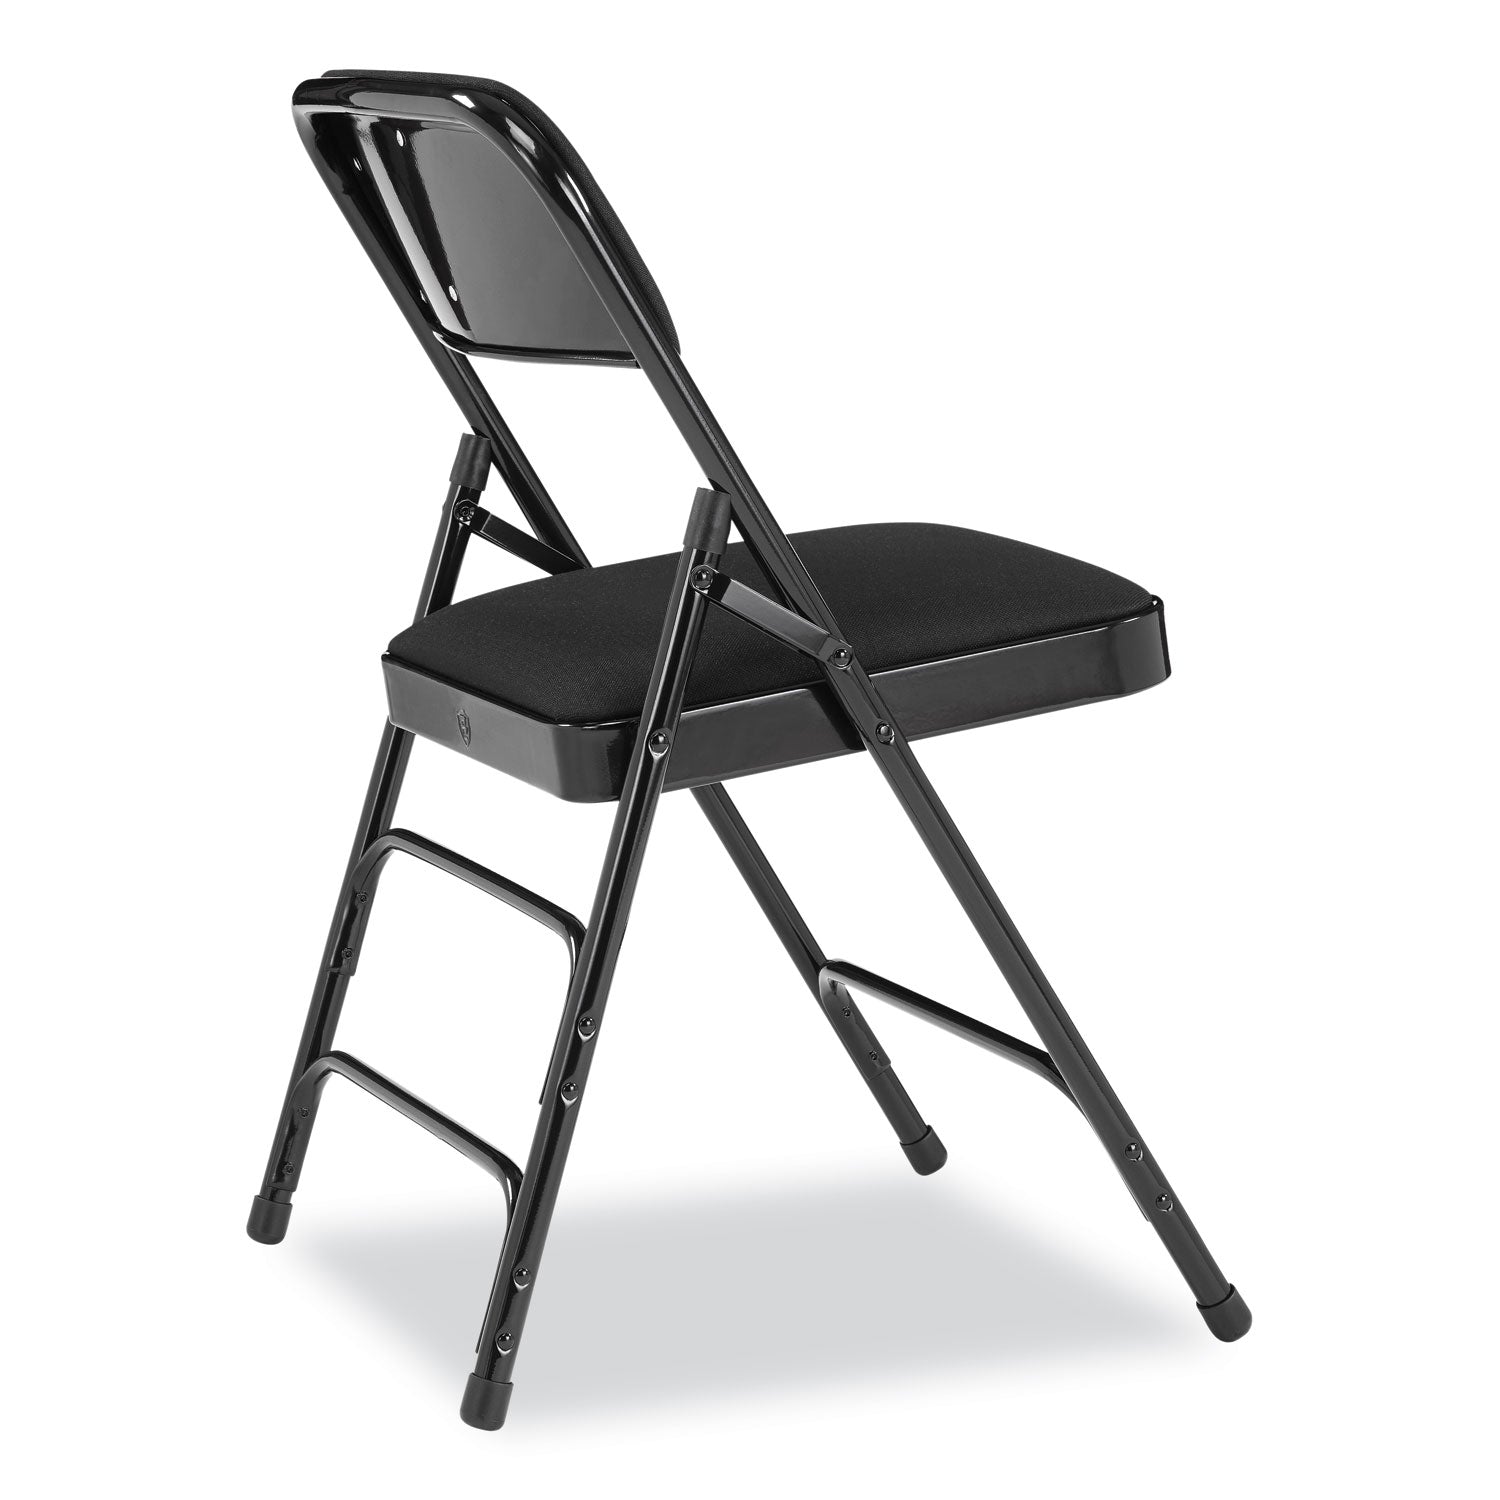 2300-series-fabric-upholstered-triple-brace-premium-folding-chair-supports-500lb-midnight-black-4-ctships-in-1-3-bus-days_nps2310 - 4